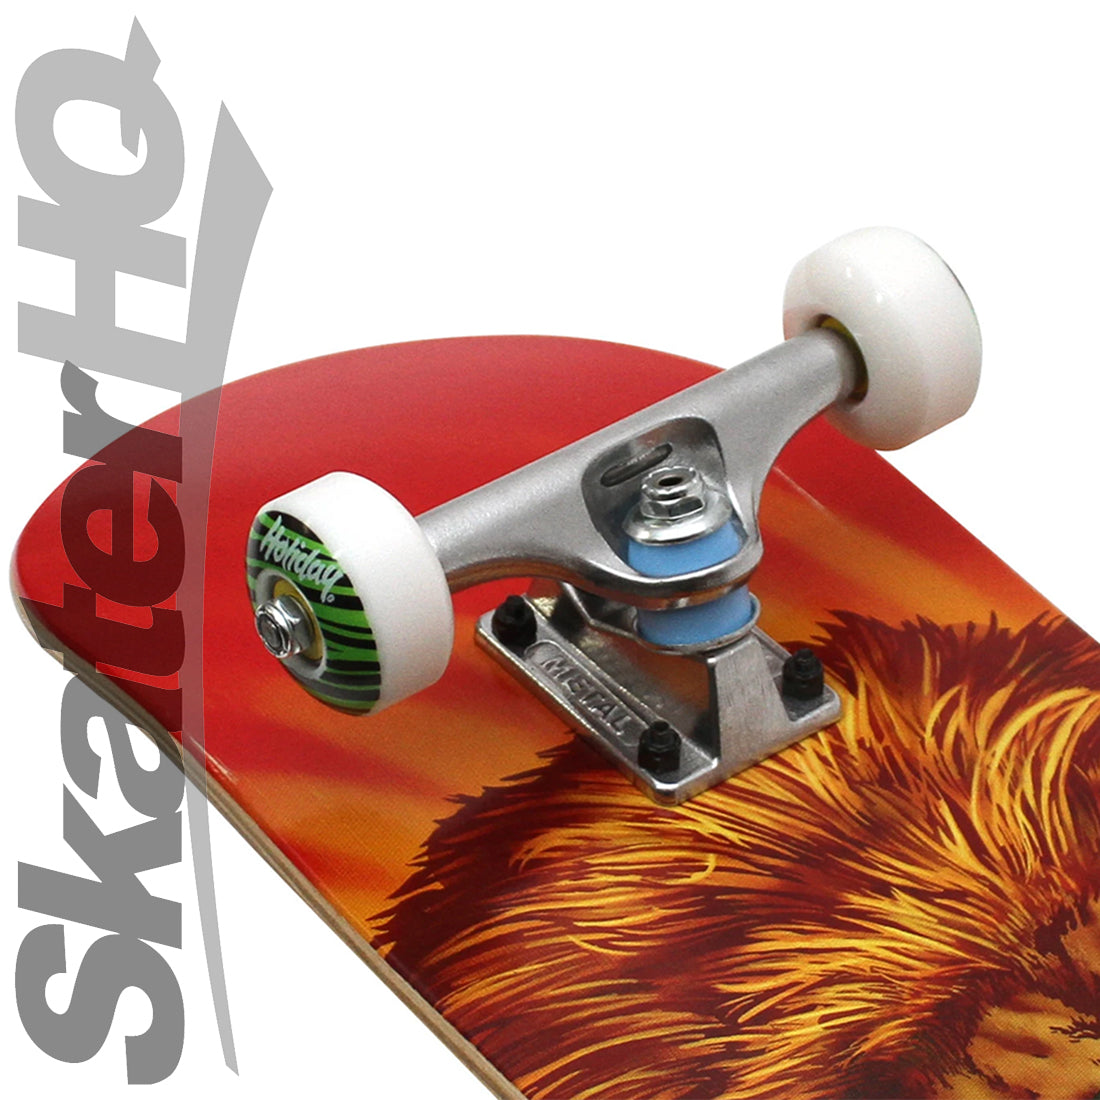 Holiday Party Lion 7.0 Mini Complete Skateboard Completes Modern Street